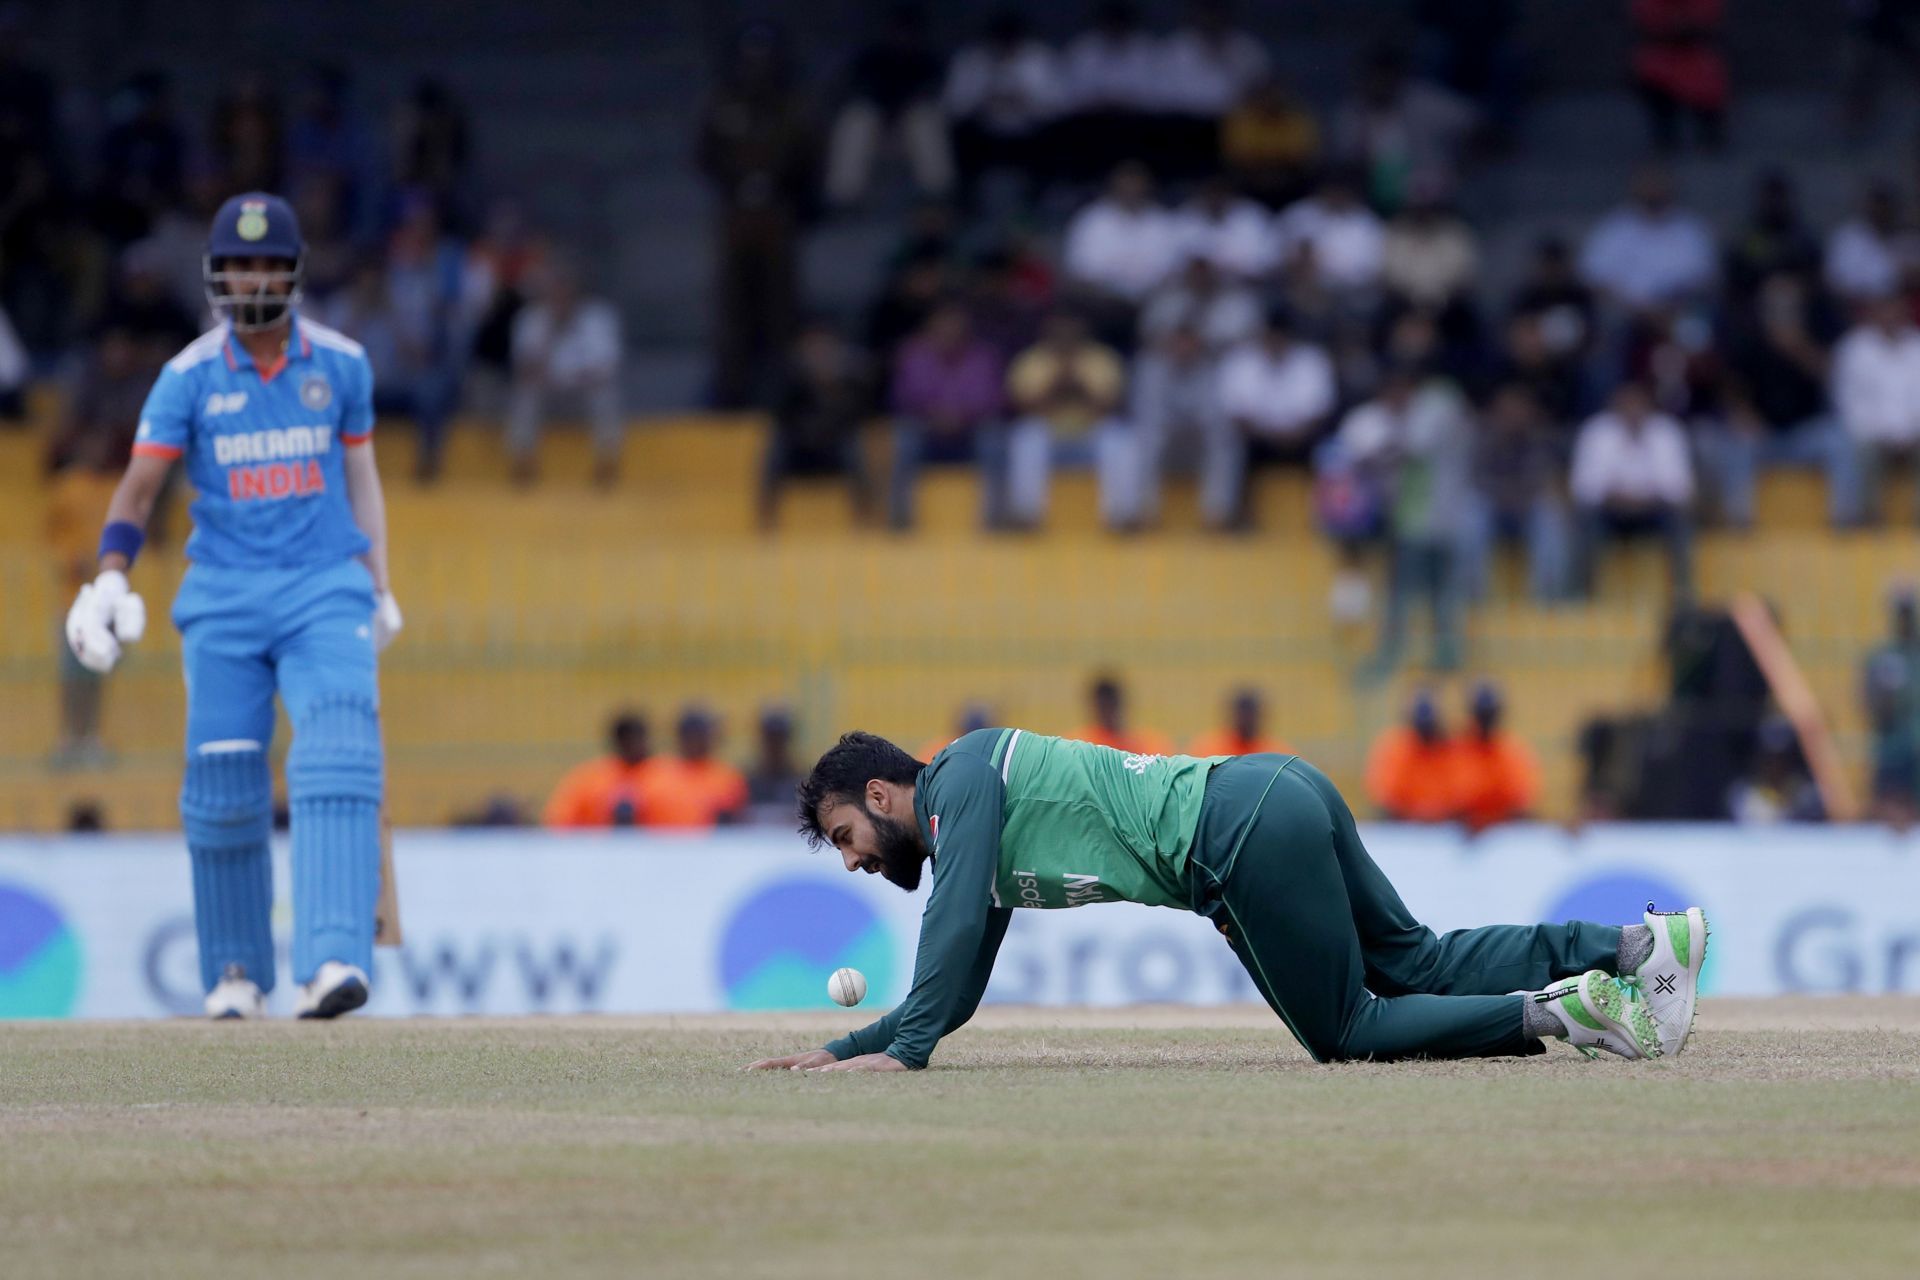 Shadab struggled to pick up wickets